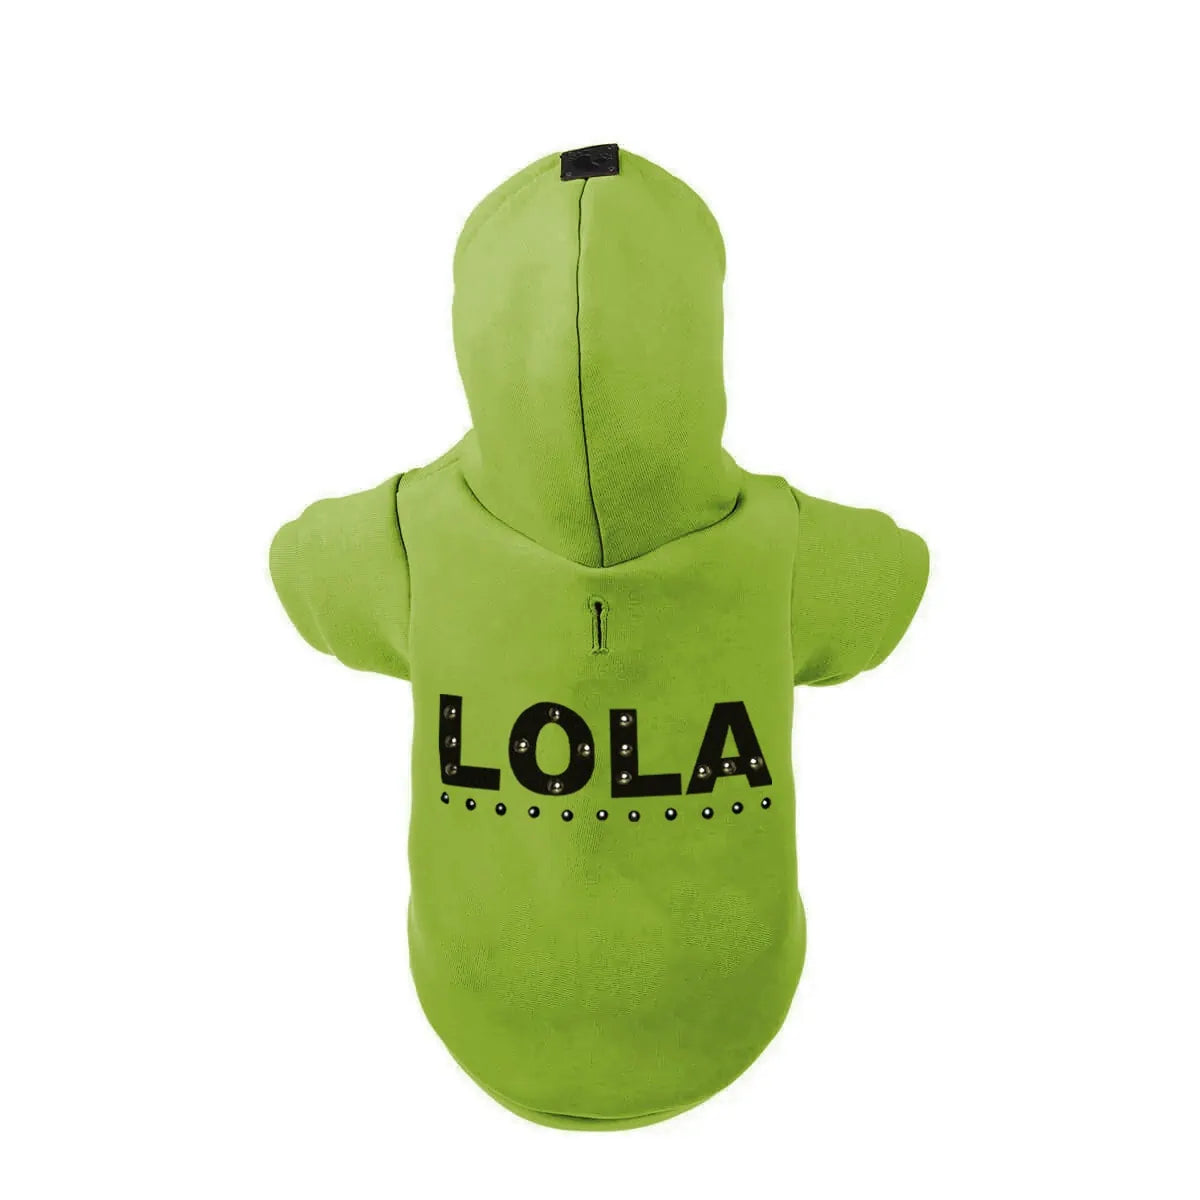 Hoodie for Bulldog with studs - Customizable with name.